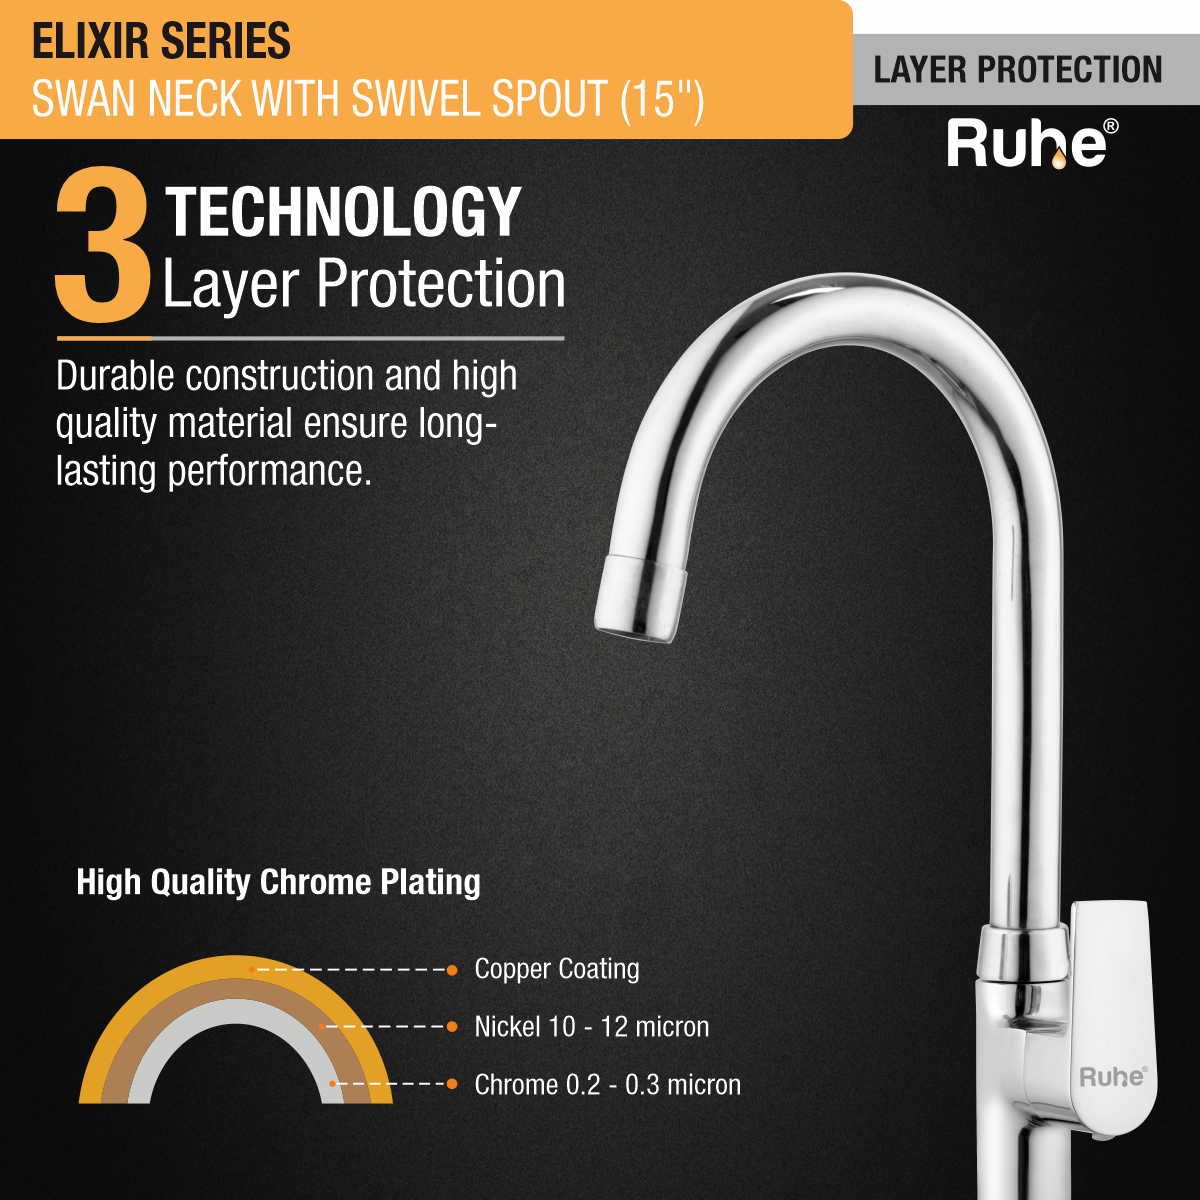 Elixir Swan Neck with Medium (15 inches) Round Swivel Spout Faucet 3 layer protection